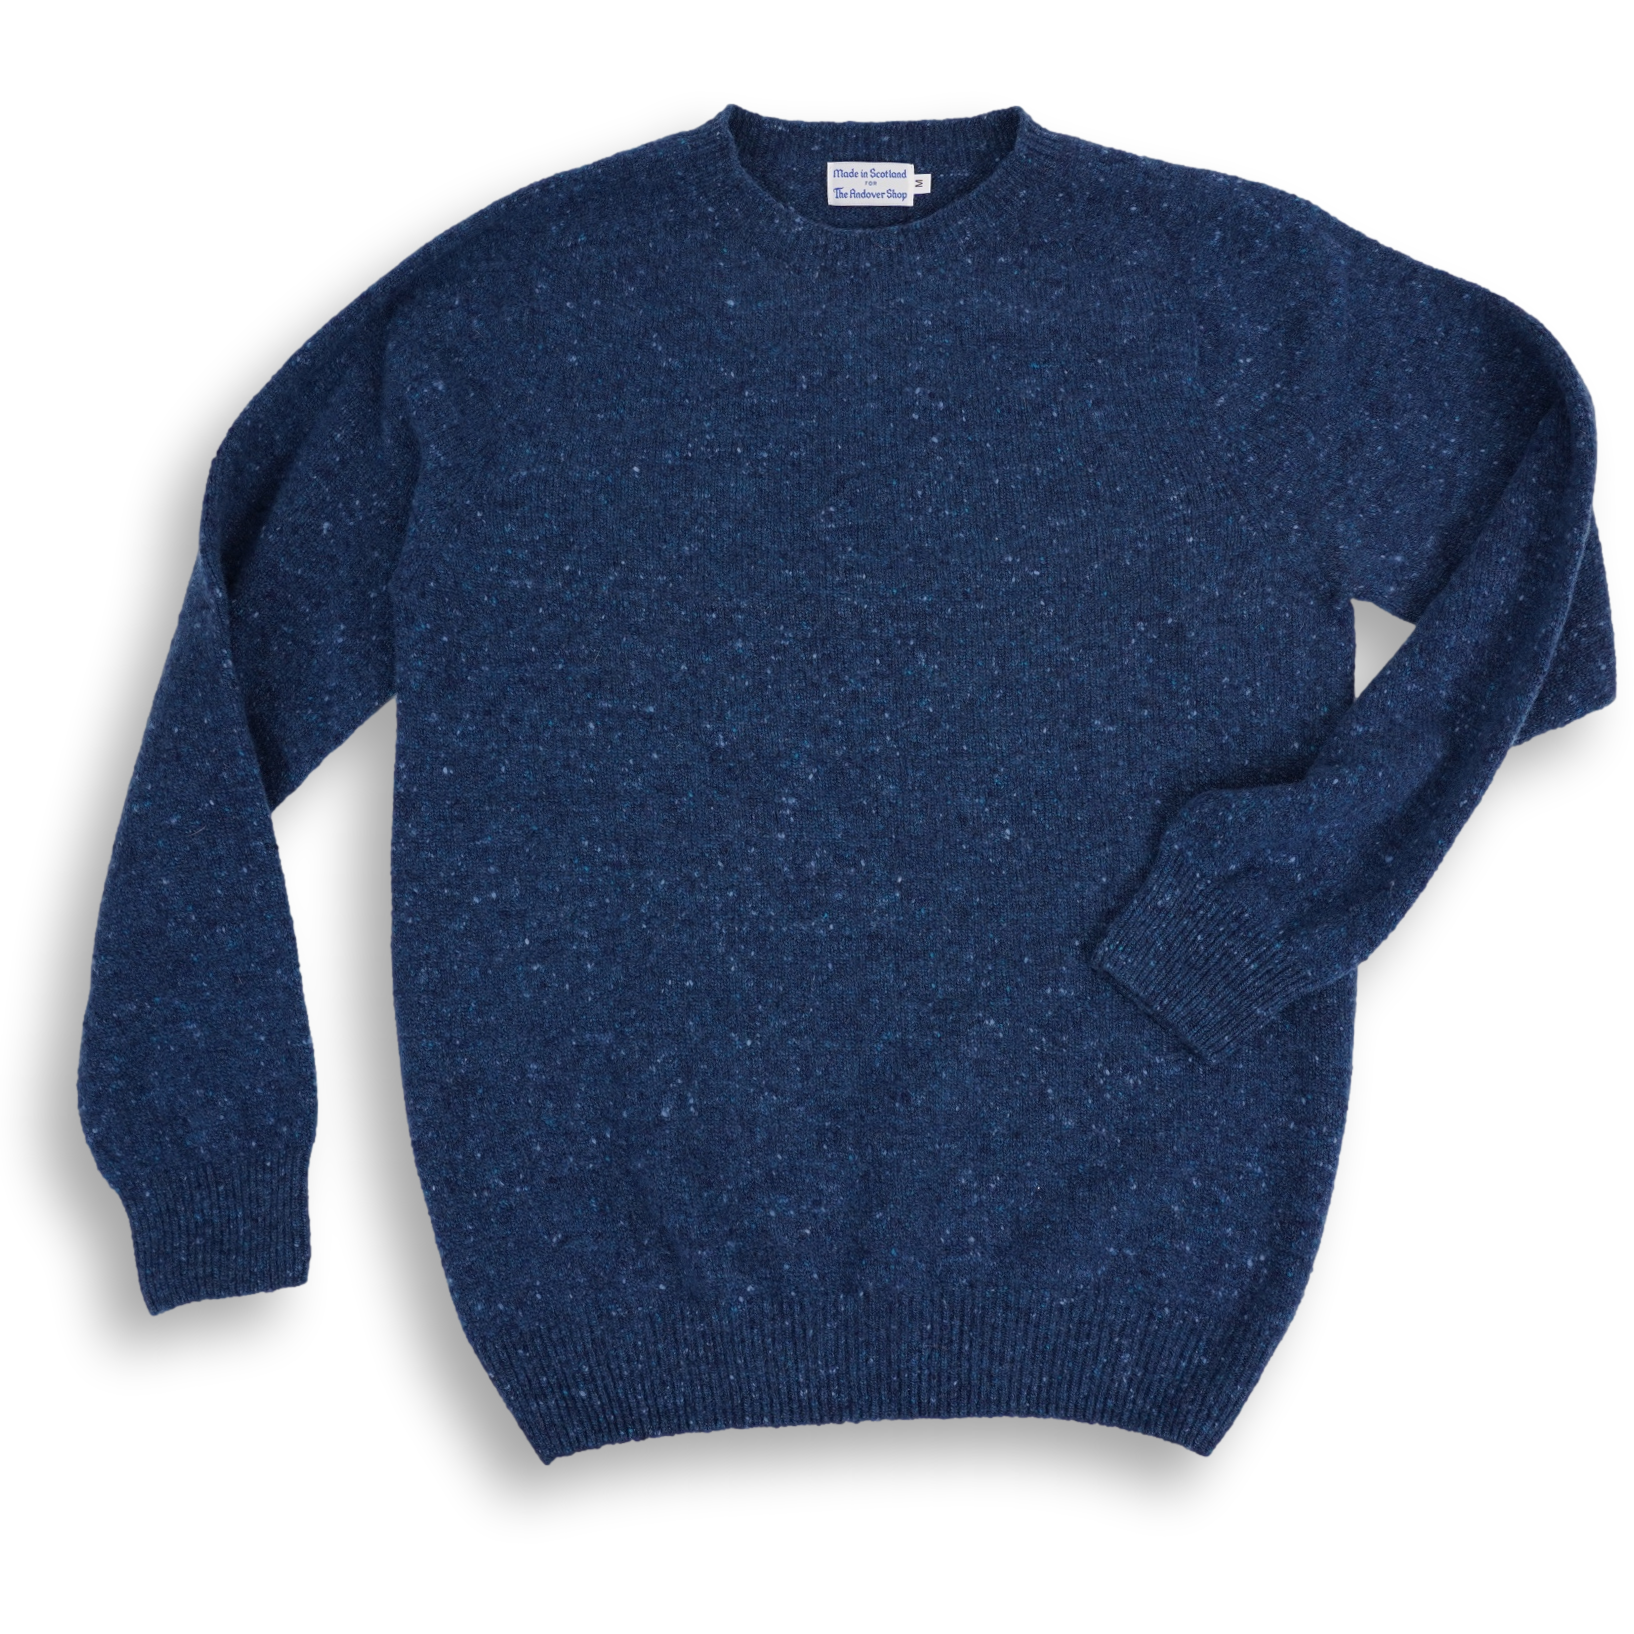 Merino Wool and Cashmere Crewneck Donegal Sweater